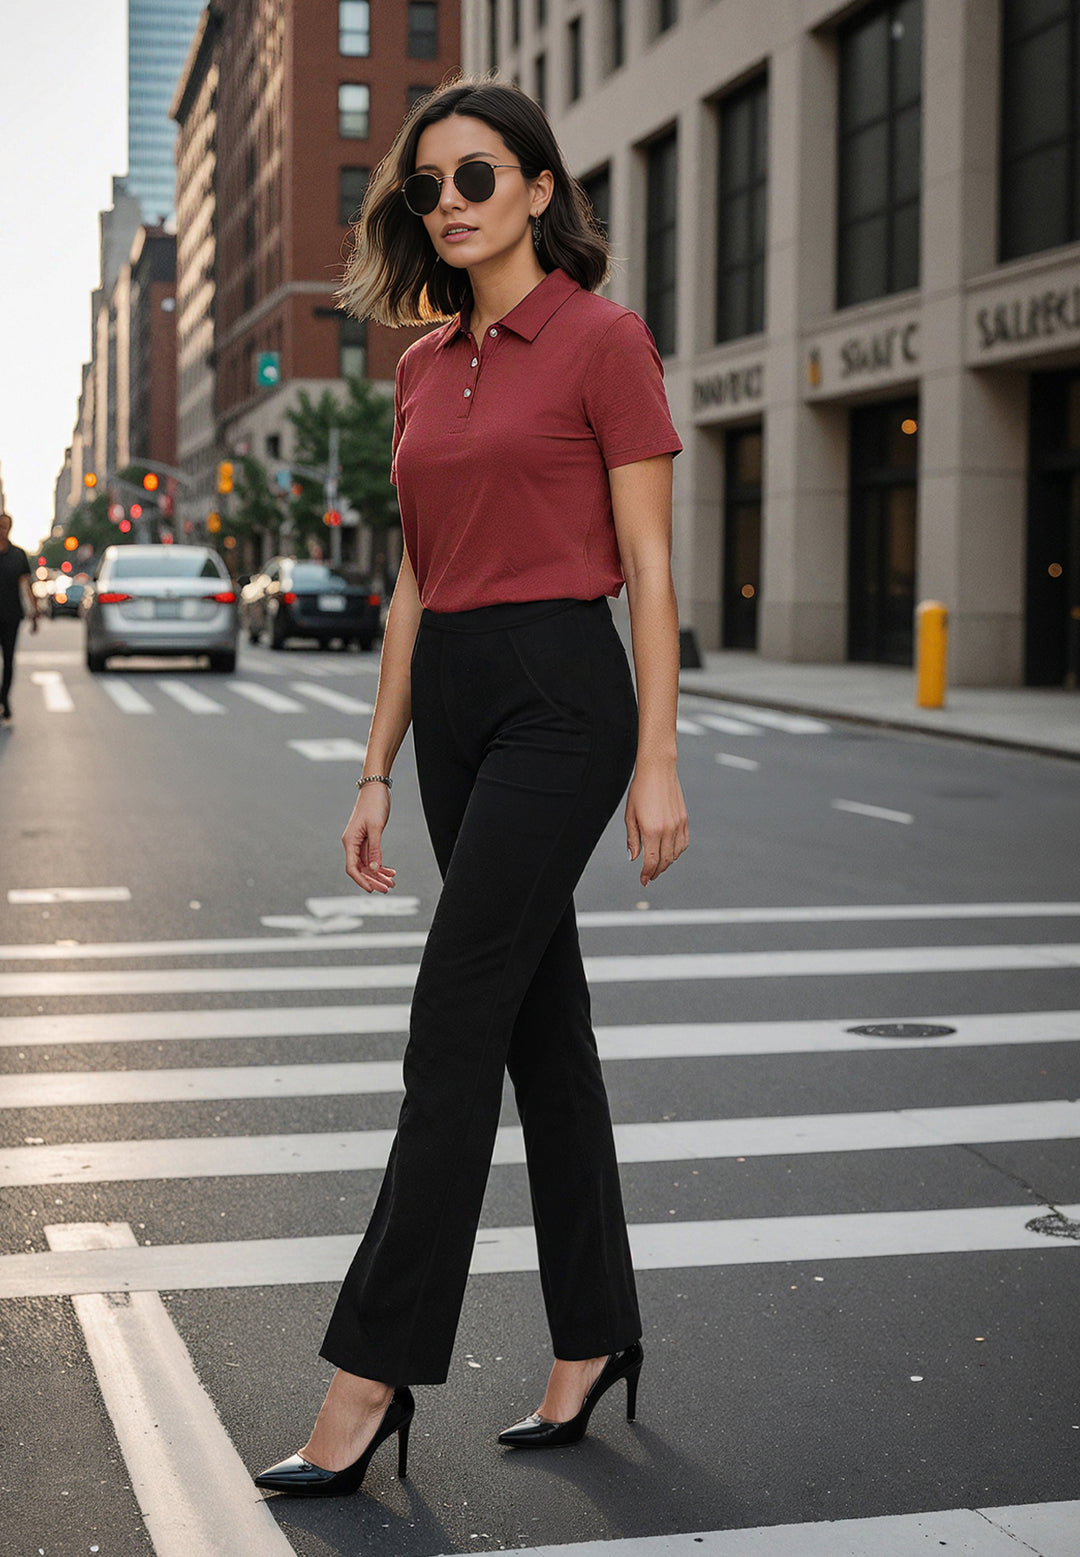 How to style burgundy pants for business casual wear. As an image co... |  TikTok